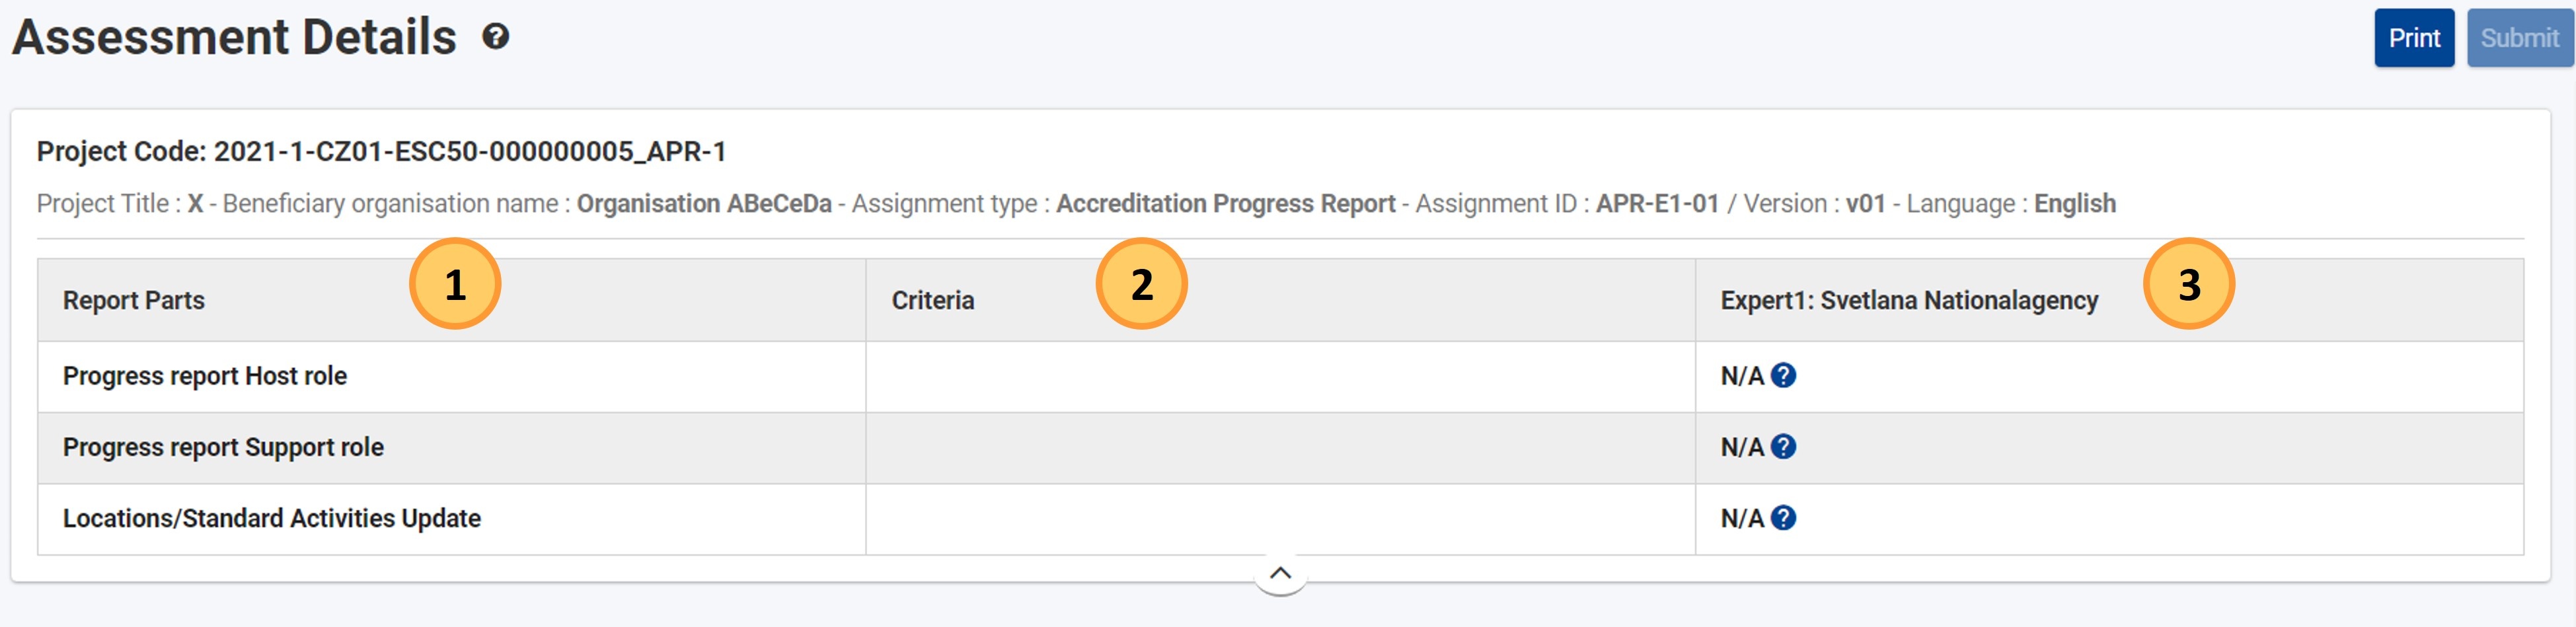 Example of the expanded header for ESC50 Accreditation Progress Report assessment, with multiple report parts not score based